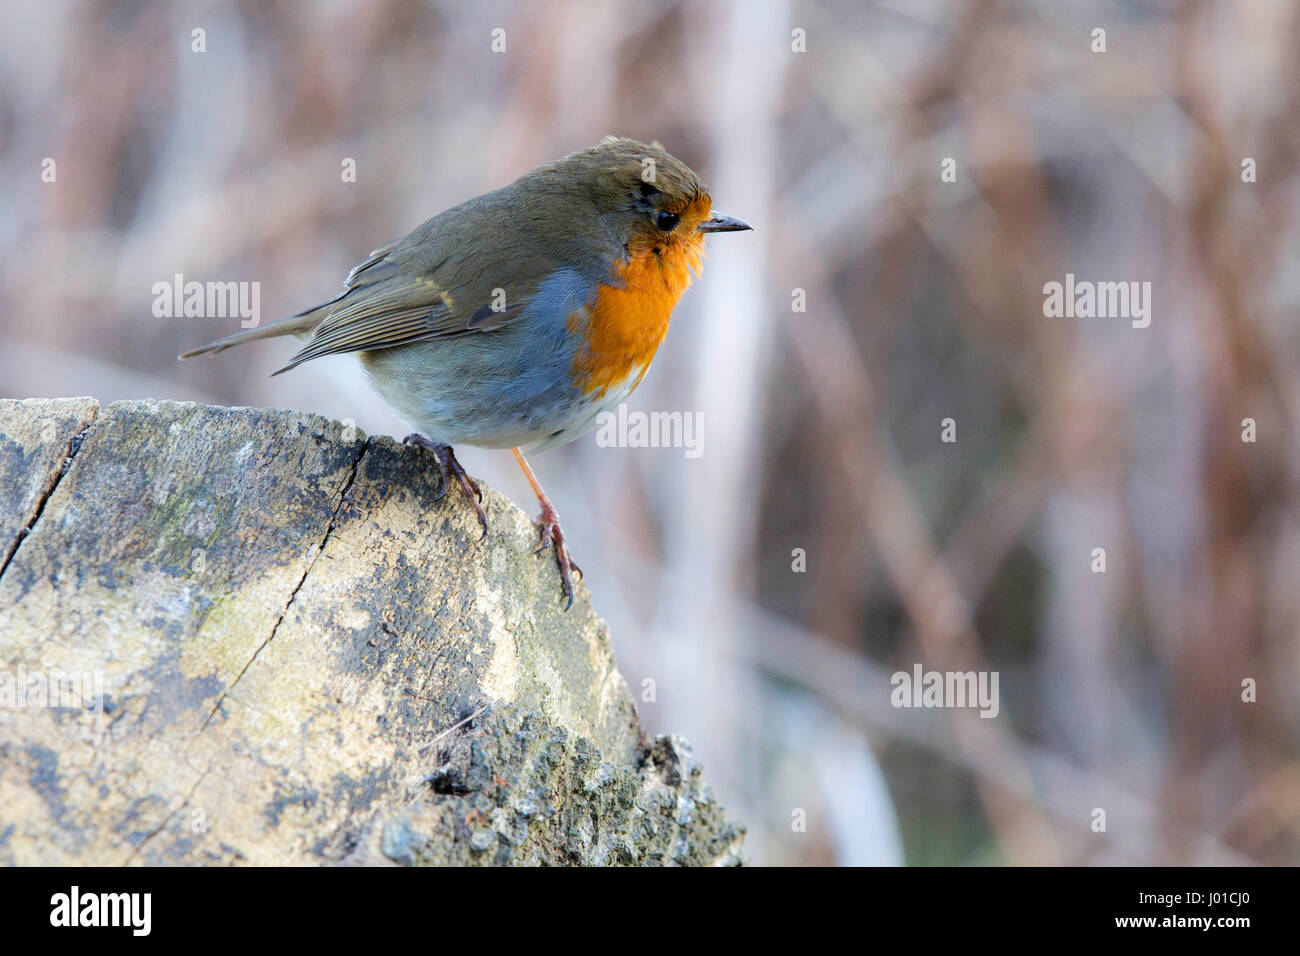 Robin redbreast sitting on lichen covered rock Stock Photo